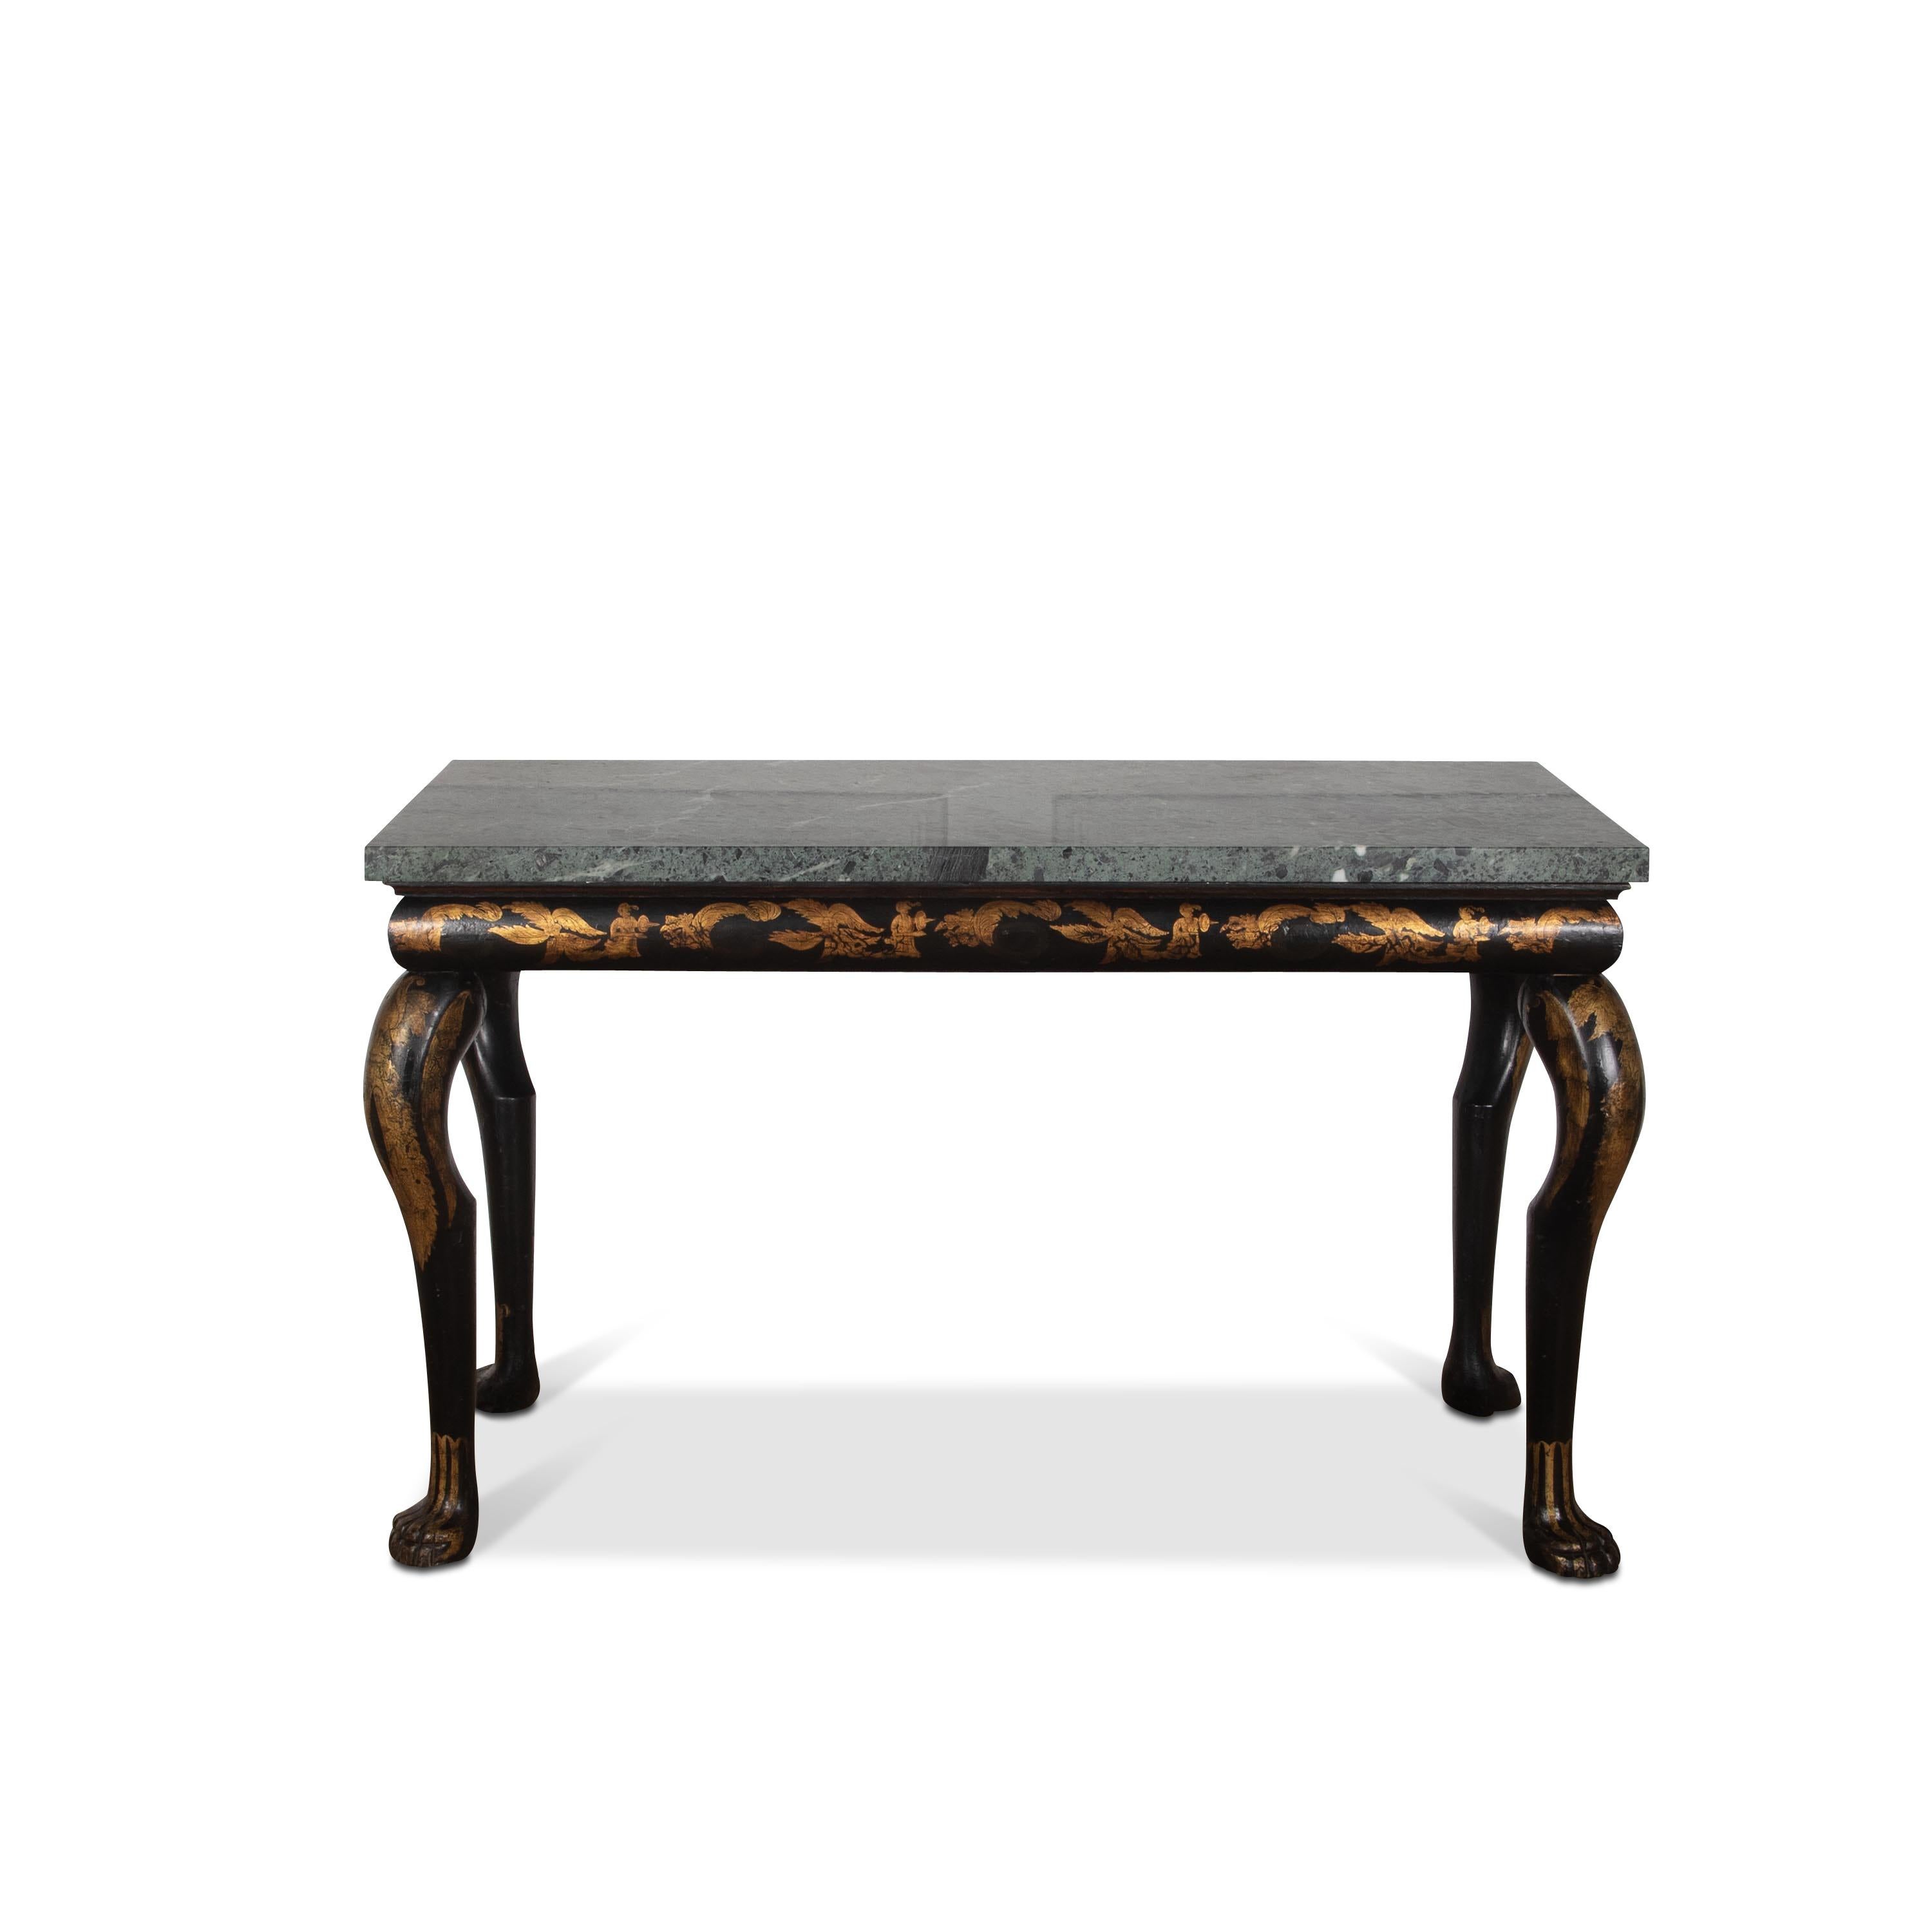 ﻿ An early 19th Century black and gilt chinoiserie marble top side/console table. The Greek green marble top above a cushion frame frieze with exaggerated cabriole legs and stylised paw feet. The whole in the original chinoiserie decoration of